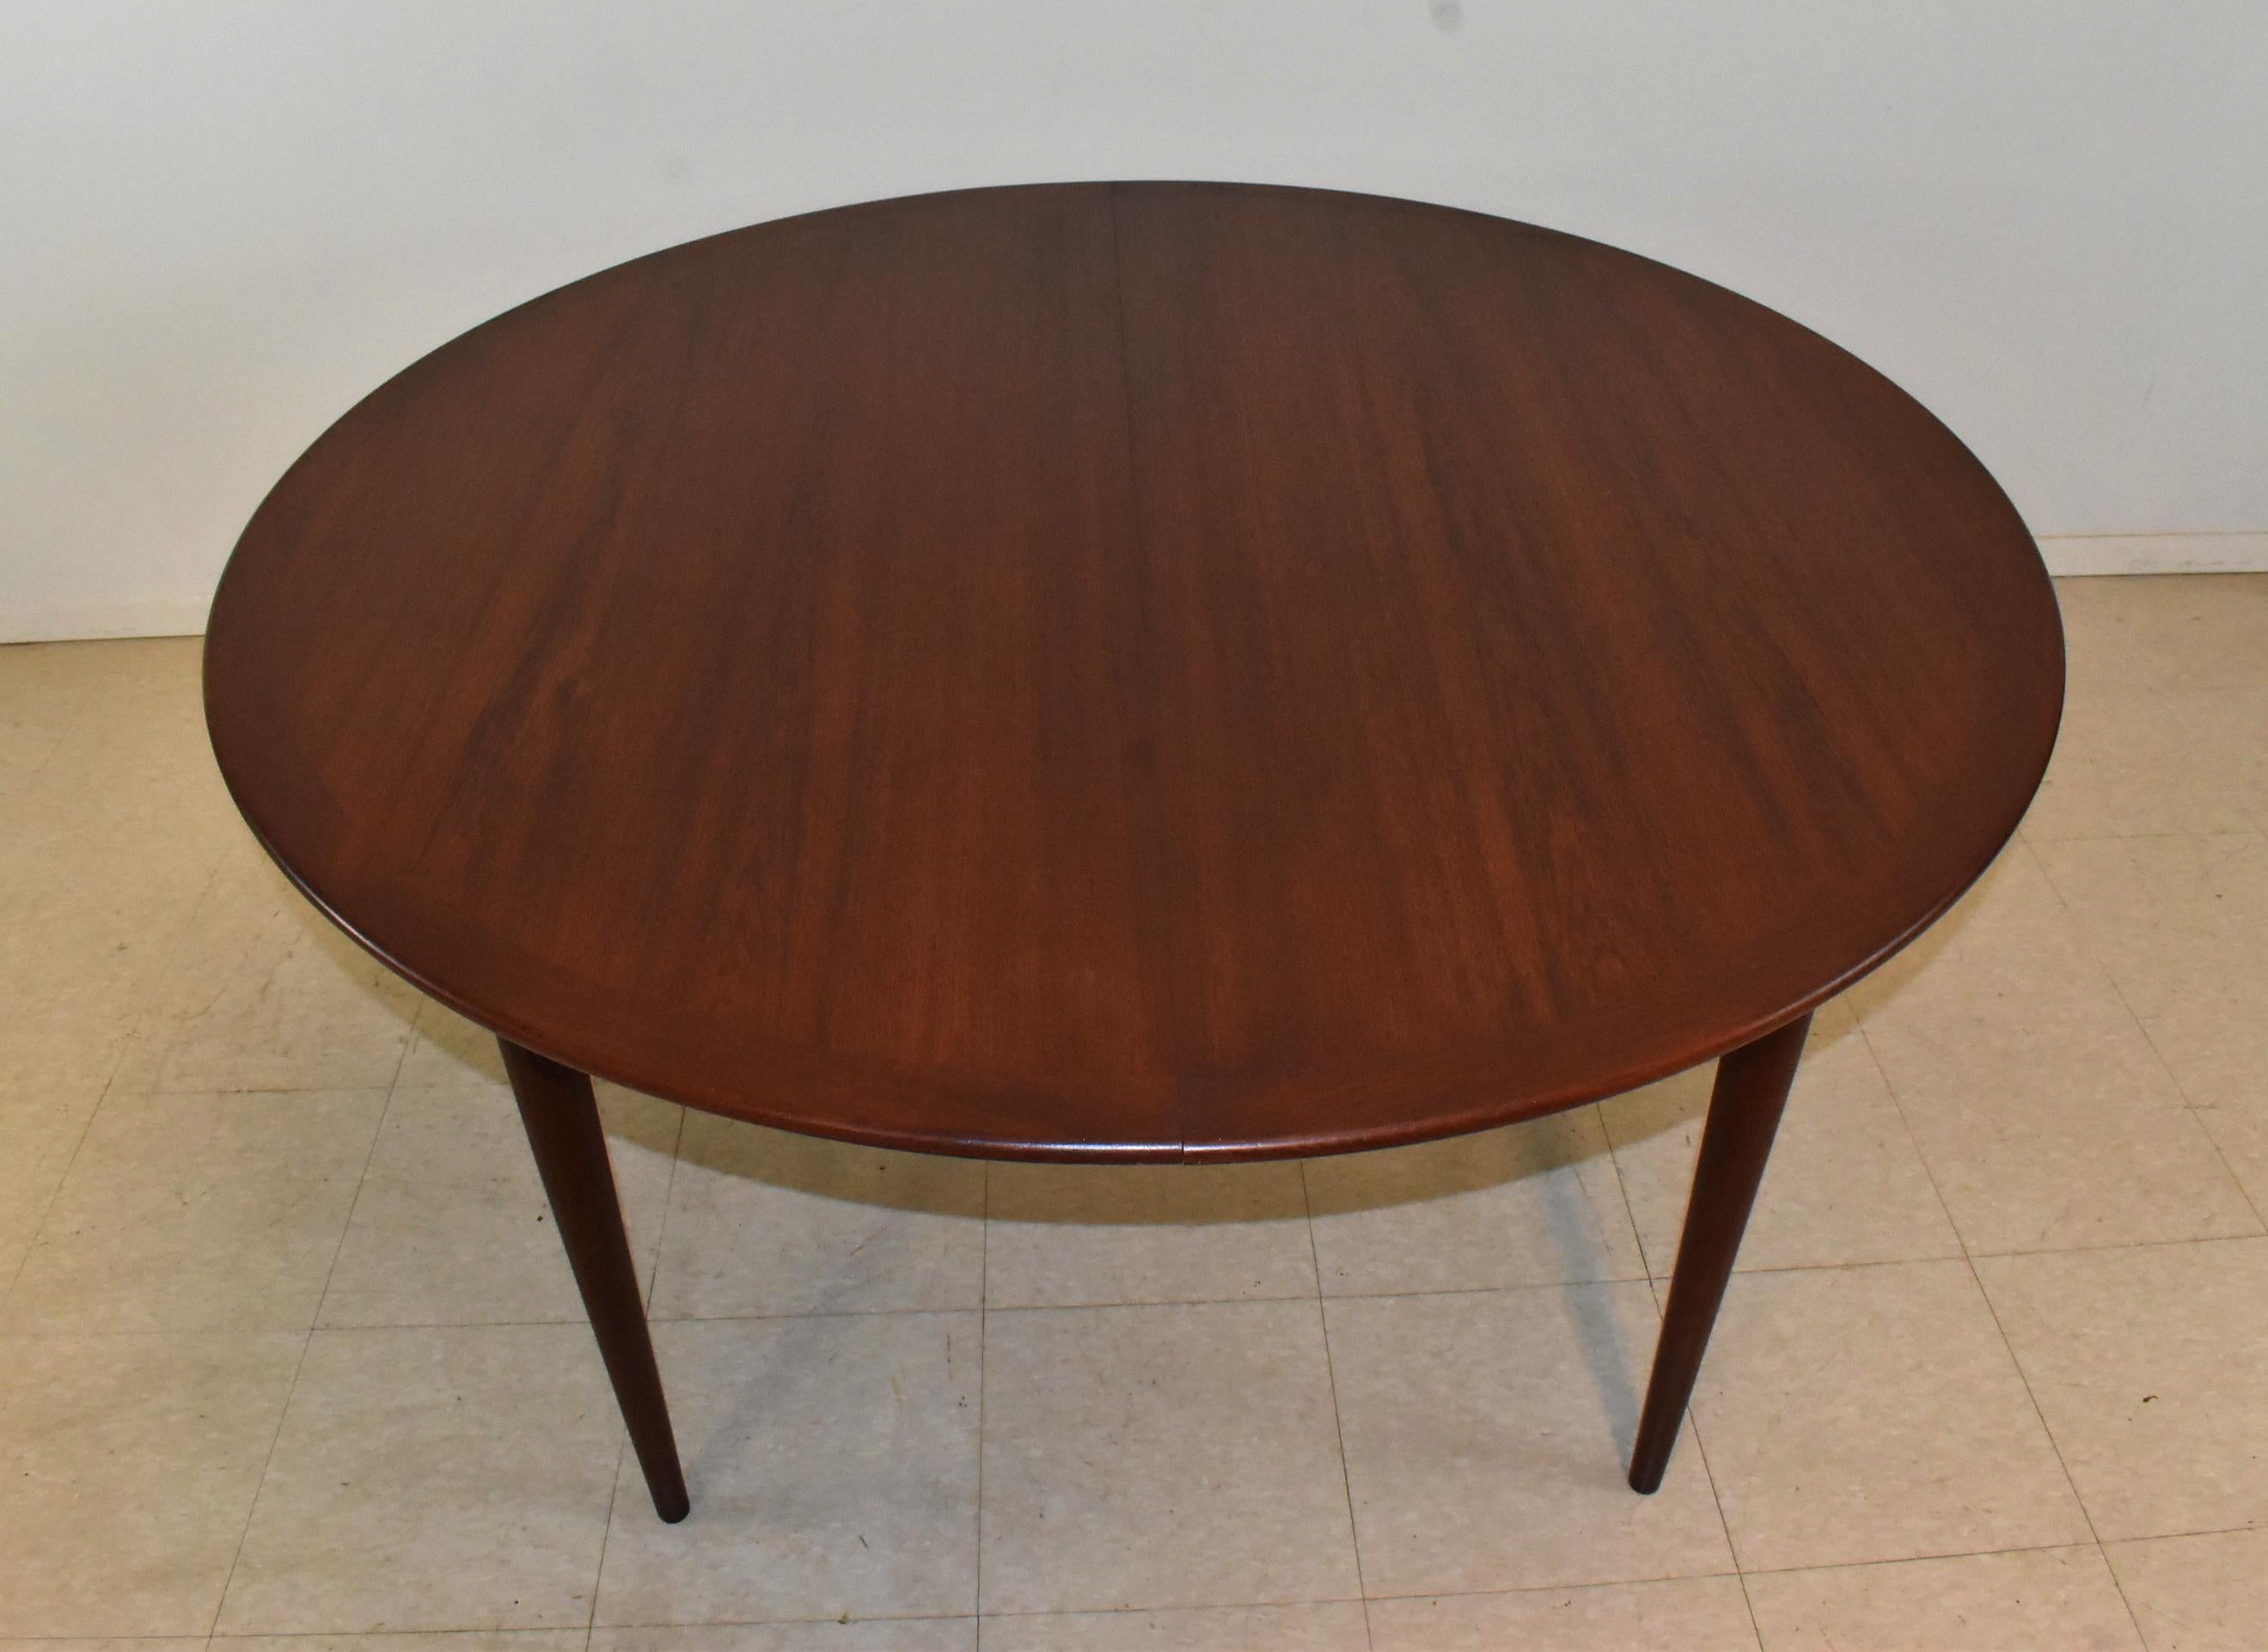 Mid-Century Modern round teak table by Grete Jalk for P. Jeppesens-Mobelfabrik. Tapered legs and two skirted 21